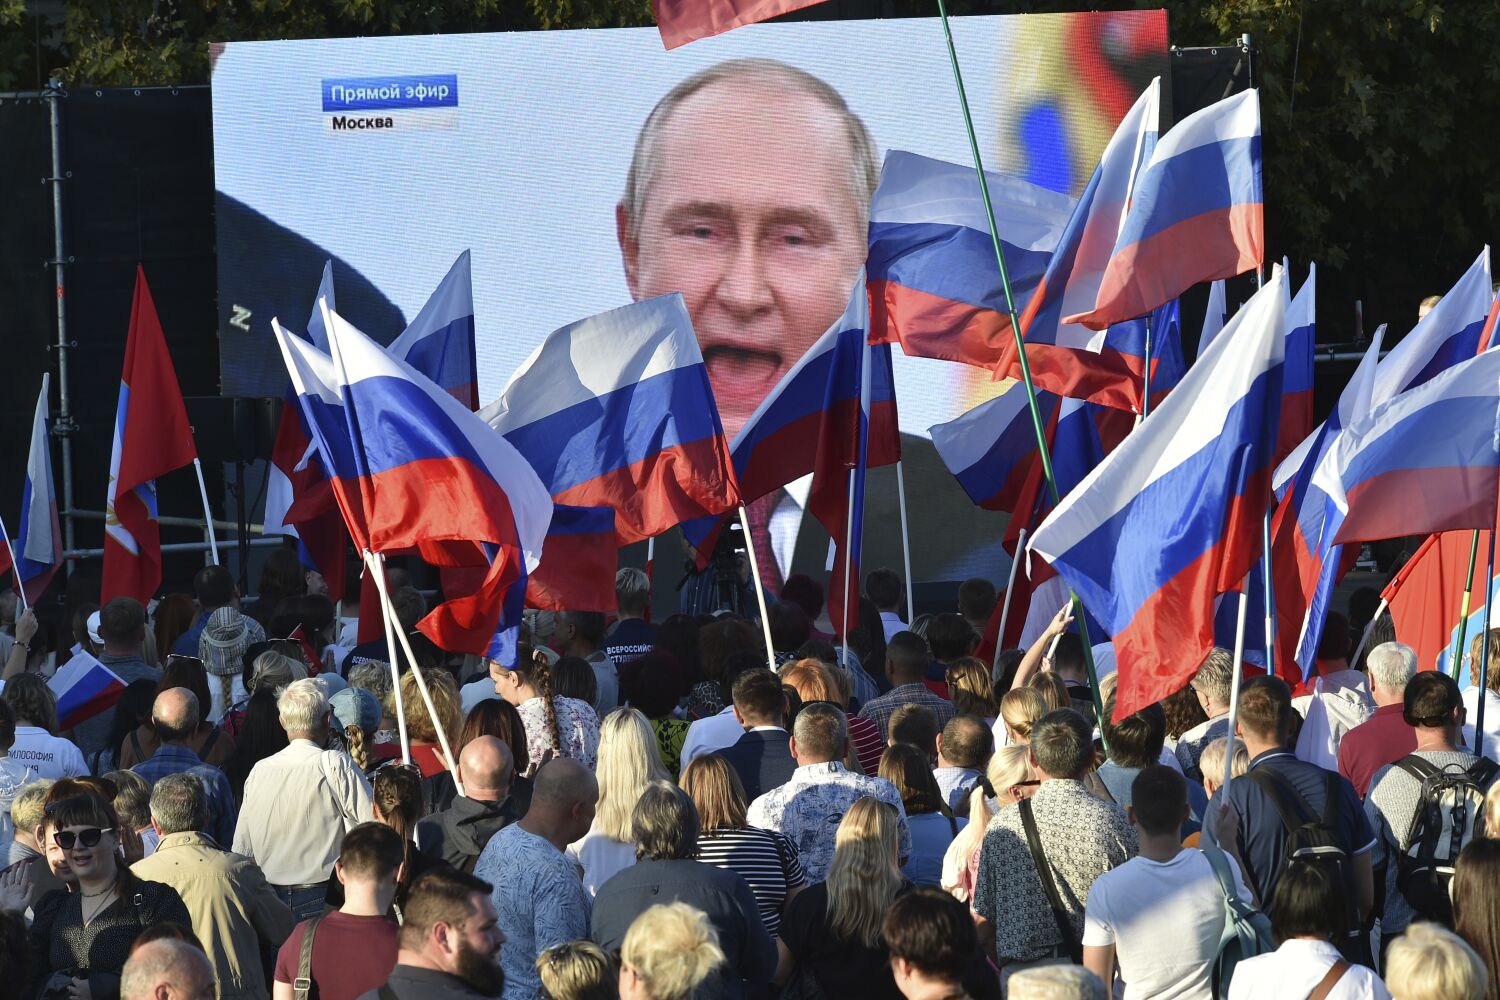 Op-Ed: The next stage of Russia's secular decline comes in 2023